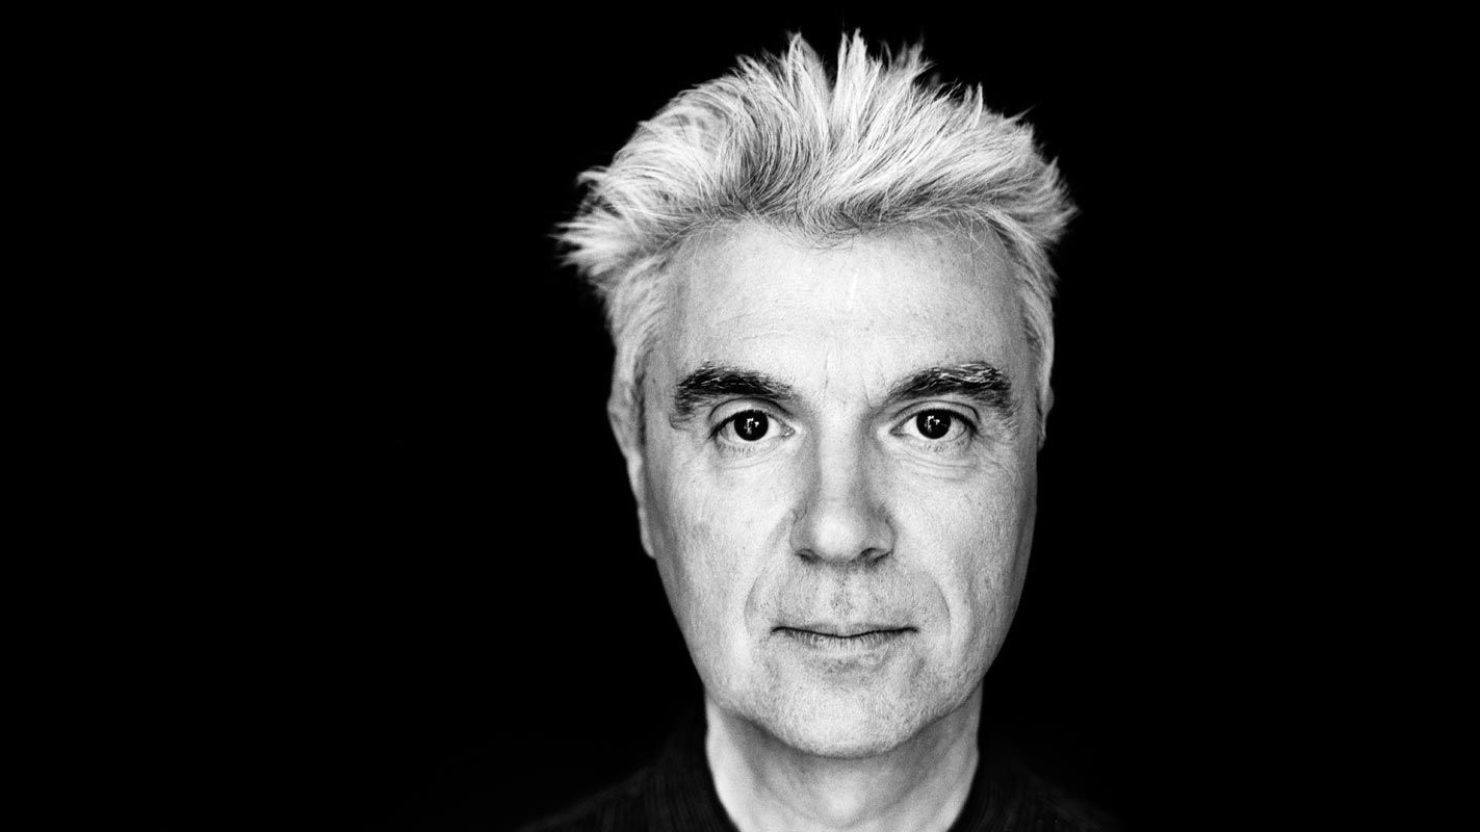 David Byrne Reveals New Album Out Next Year, Collaborations With Brian Eno And Oneohtrix Point Never, Tour Plans